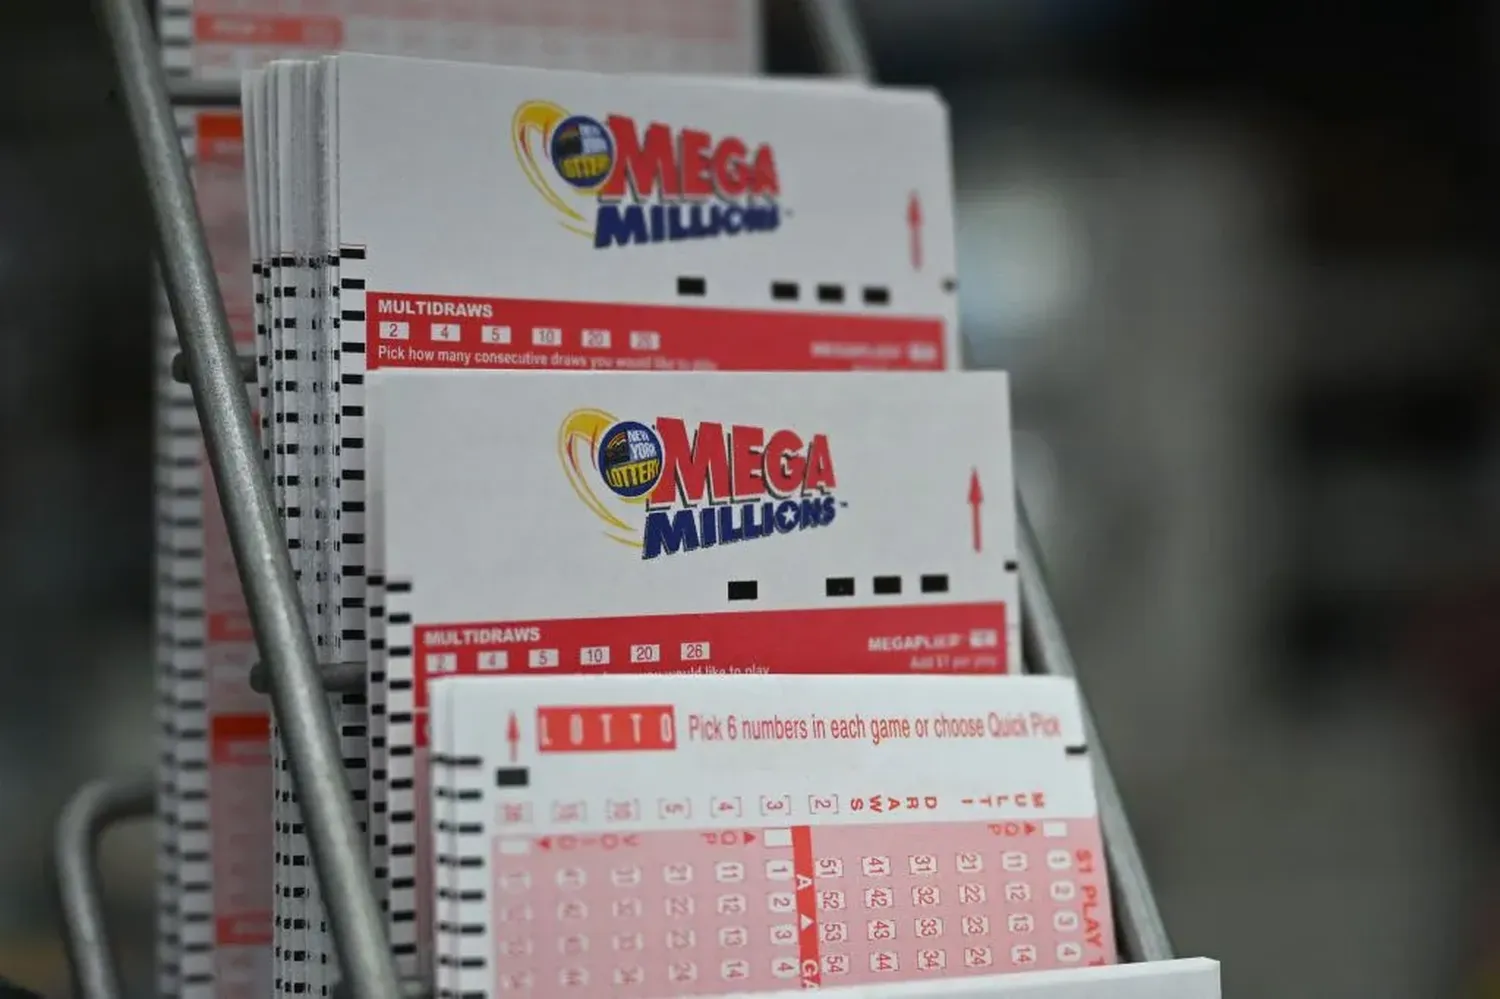 Mega Millions lottery tickets are seen in a store in New York